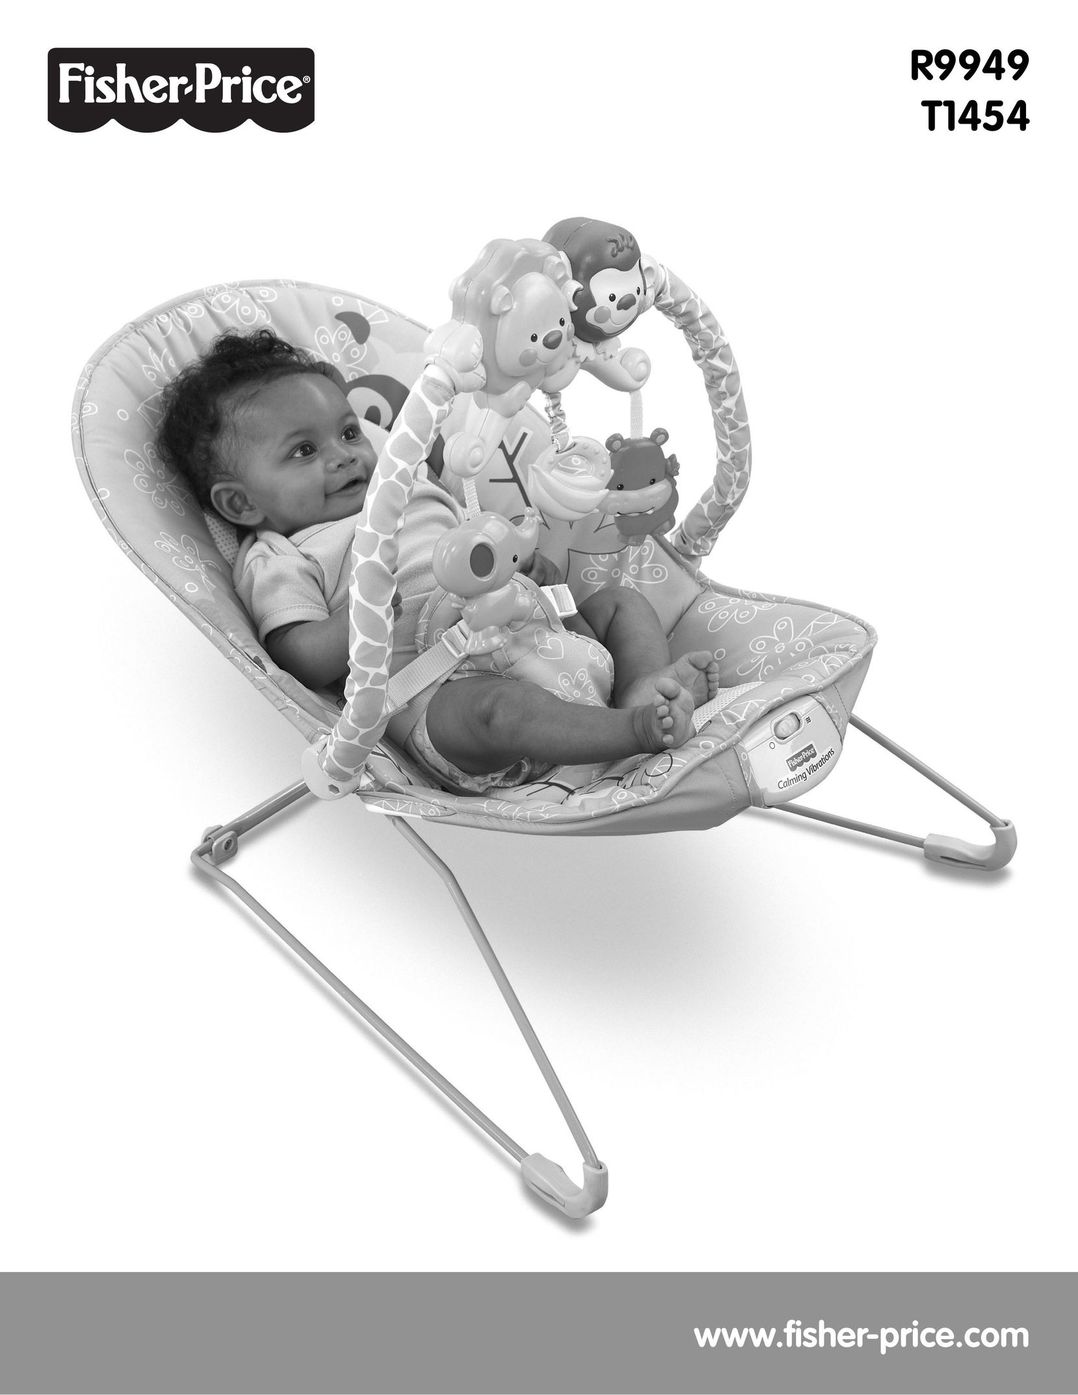 Fisher-Price R9949 Baby Accessories User Manual